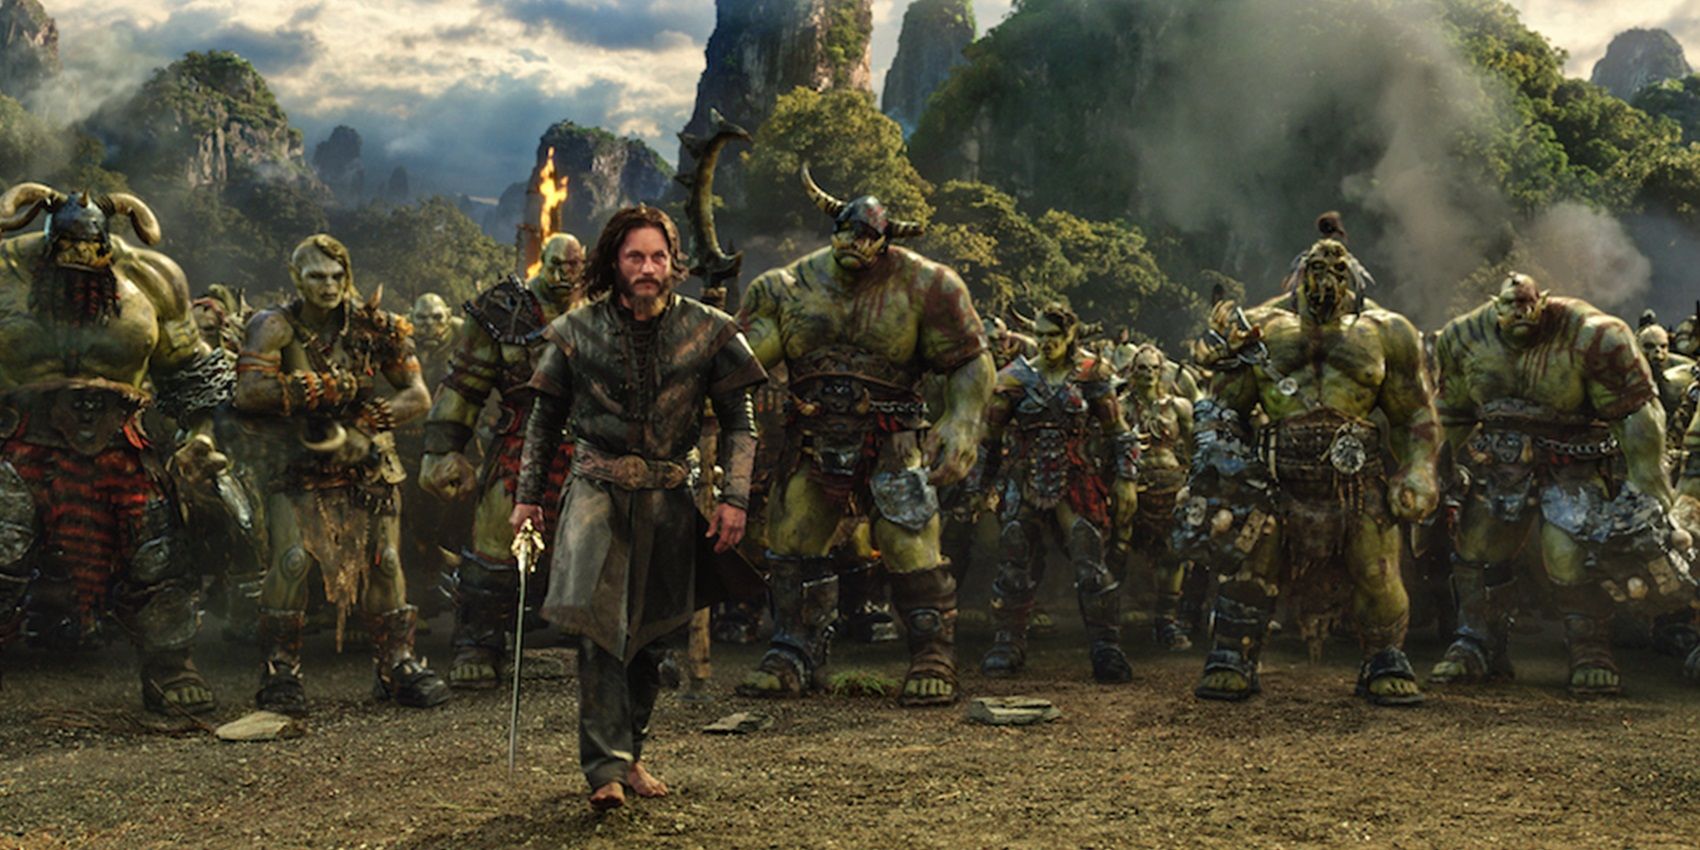 An army gathered in the Warcraft movie